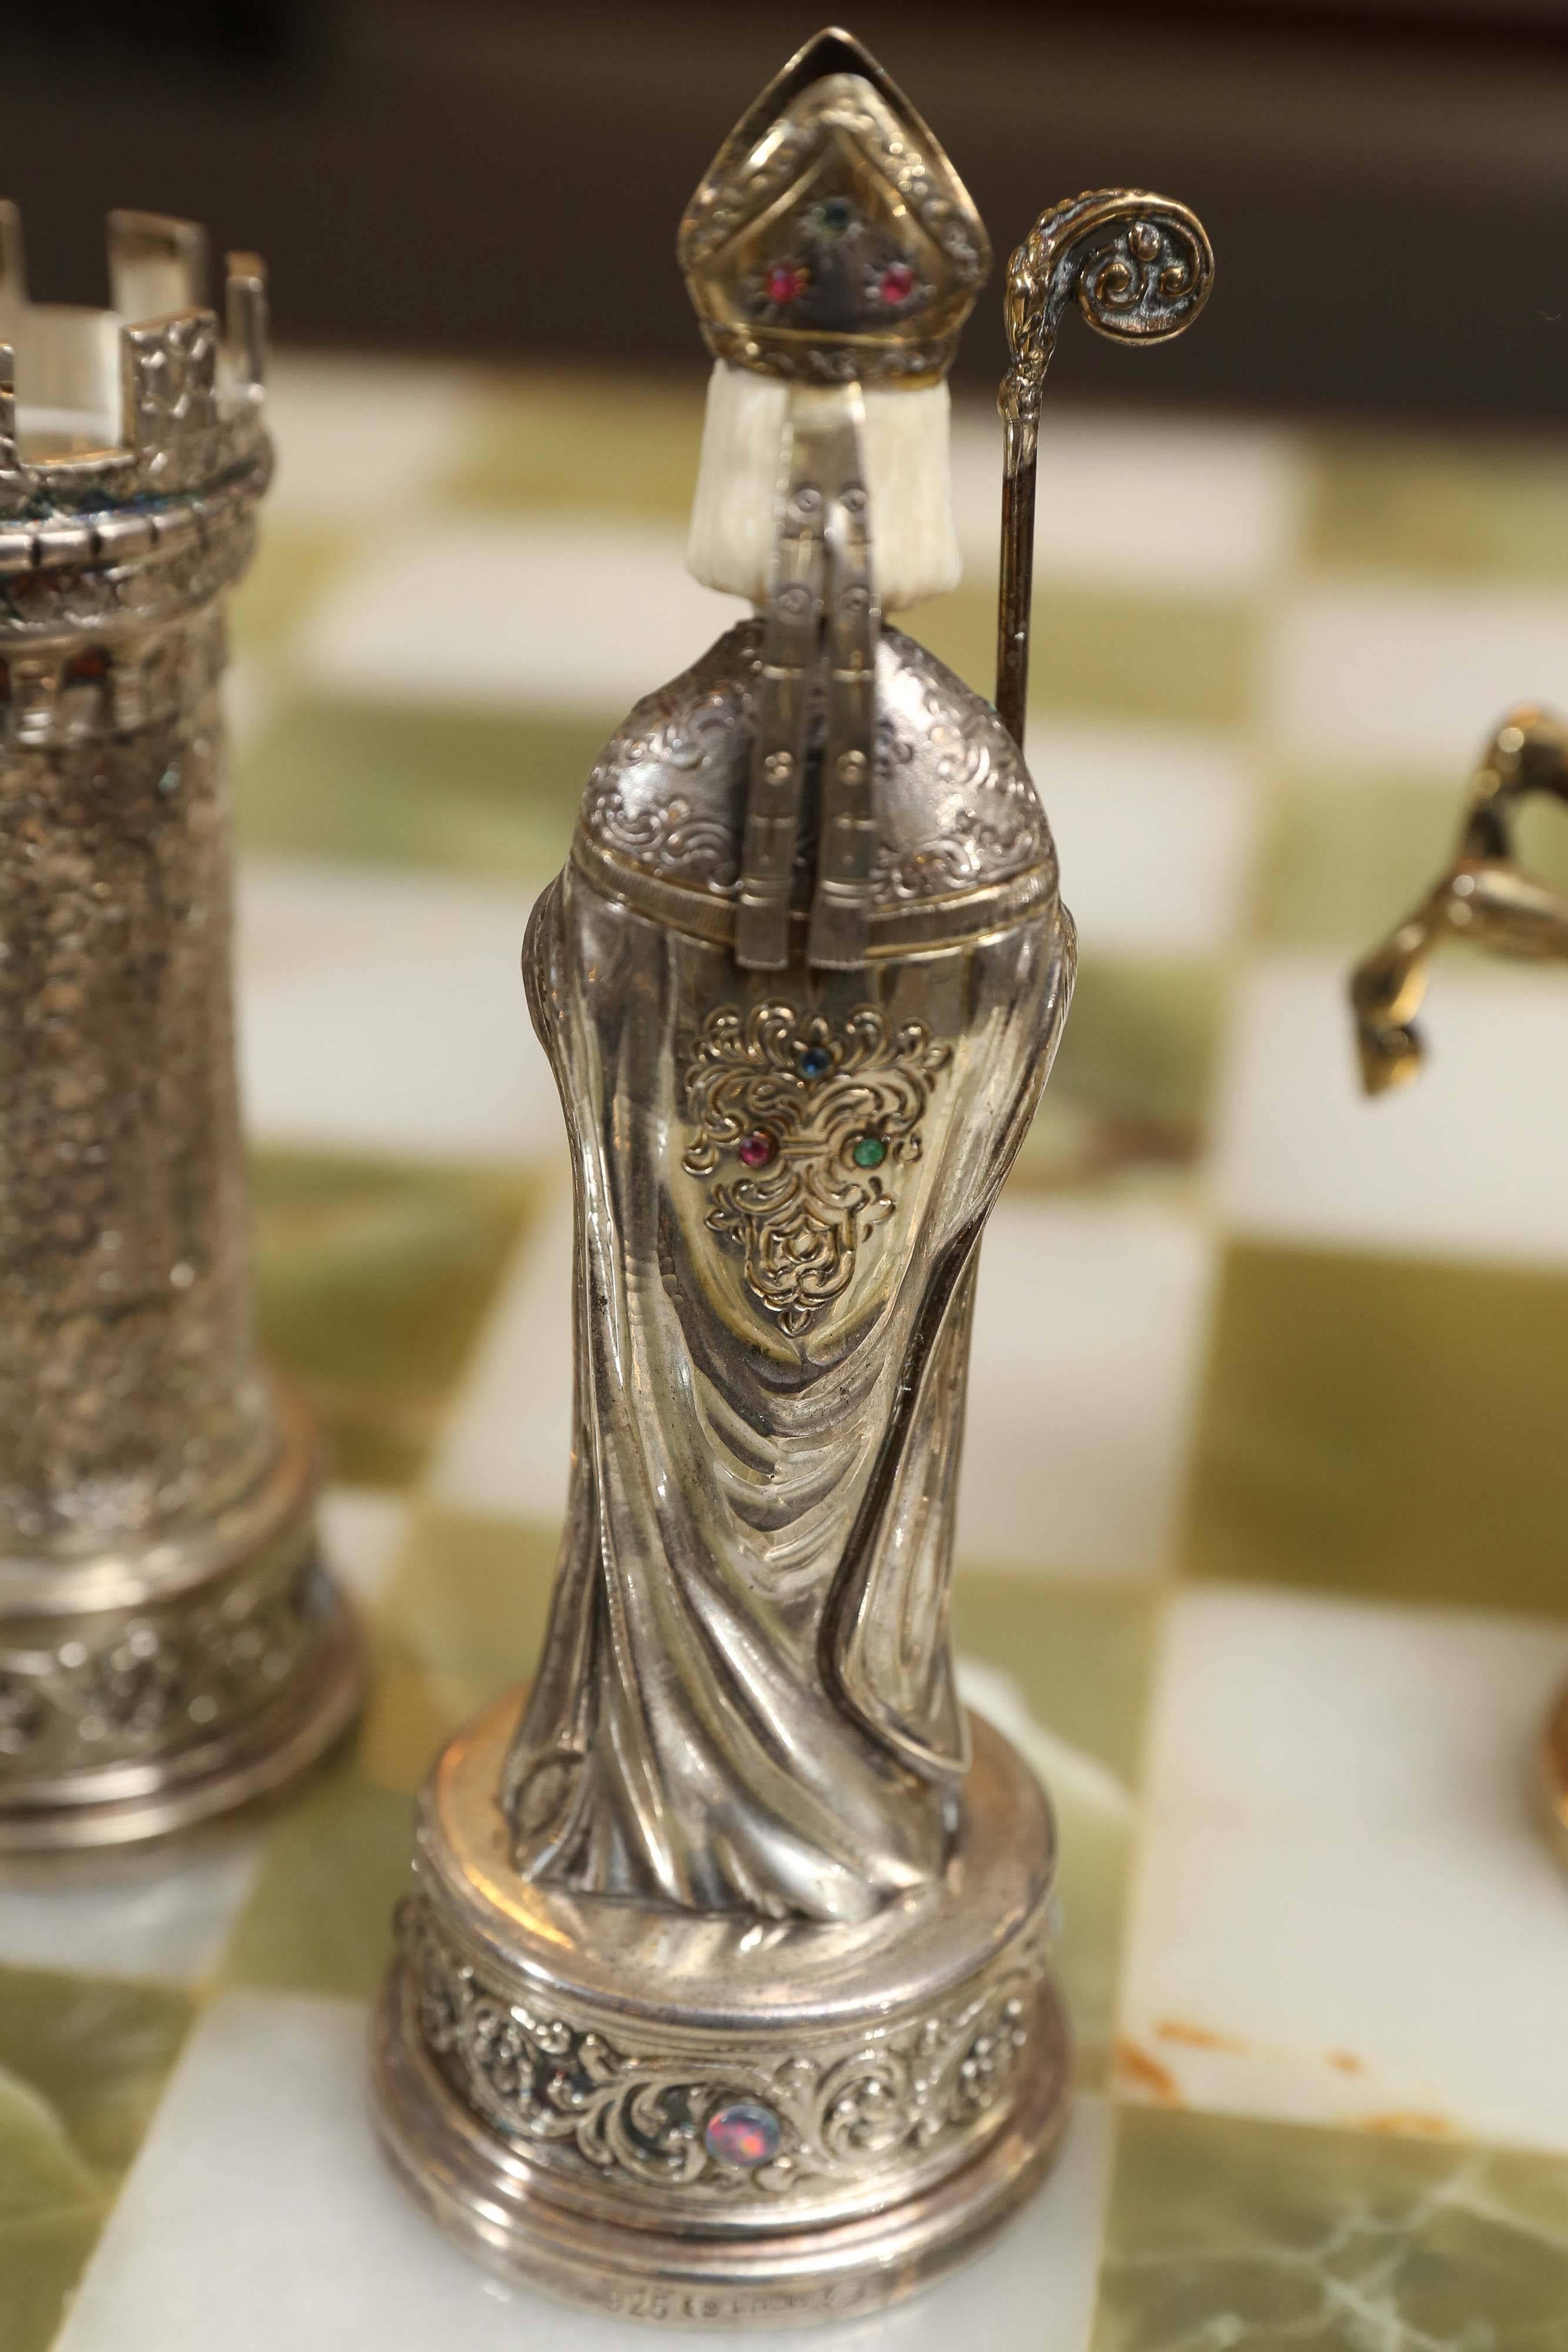 20th Century German Jewel-Encrusted Sterling Silver Chess Set